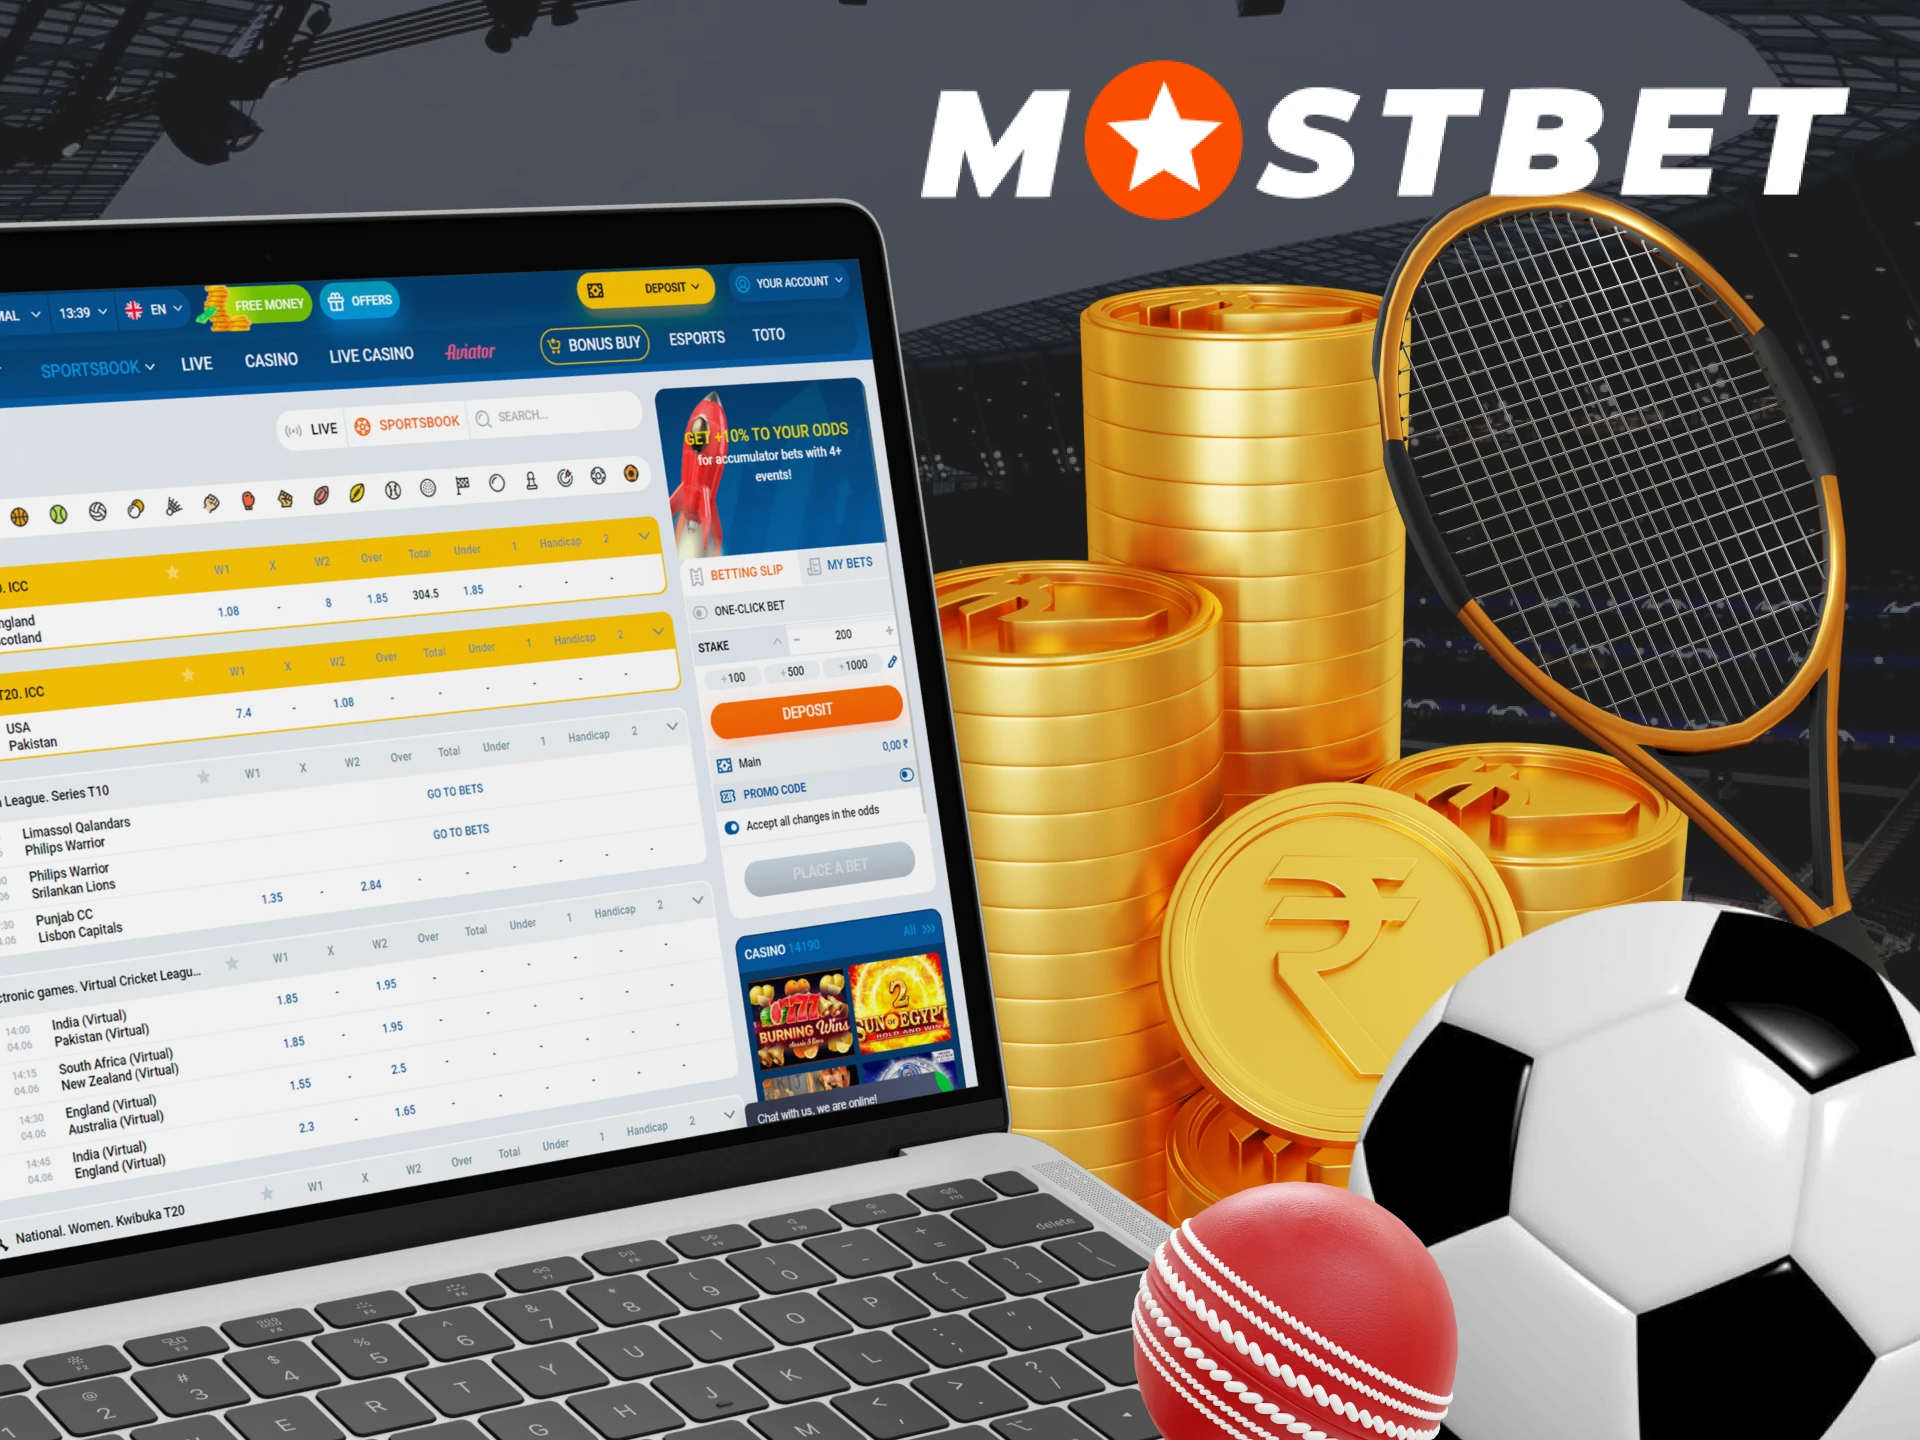 To start betting on Mostbet after registering, follow these steps.